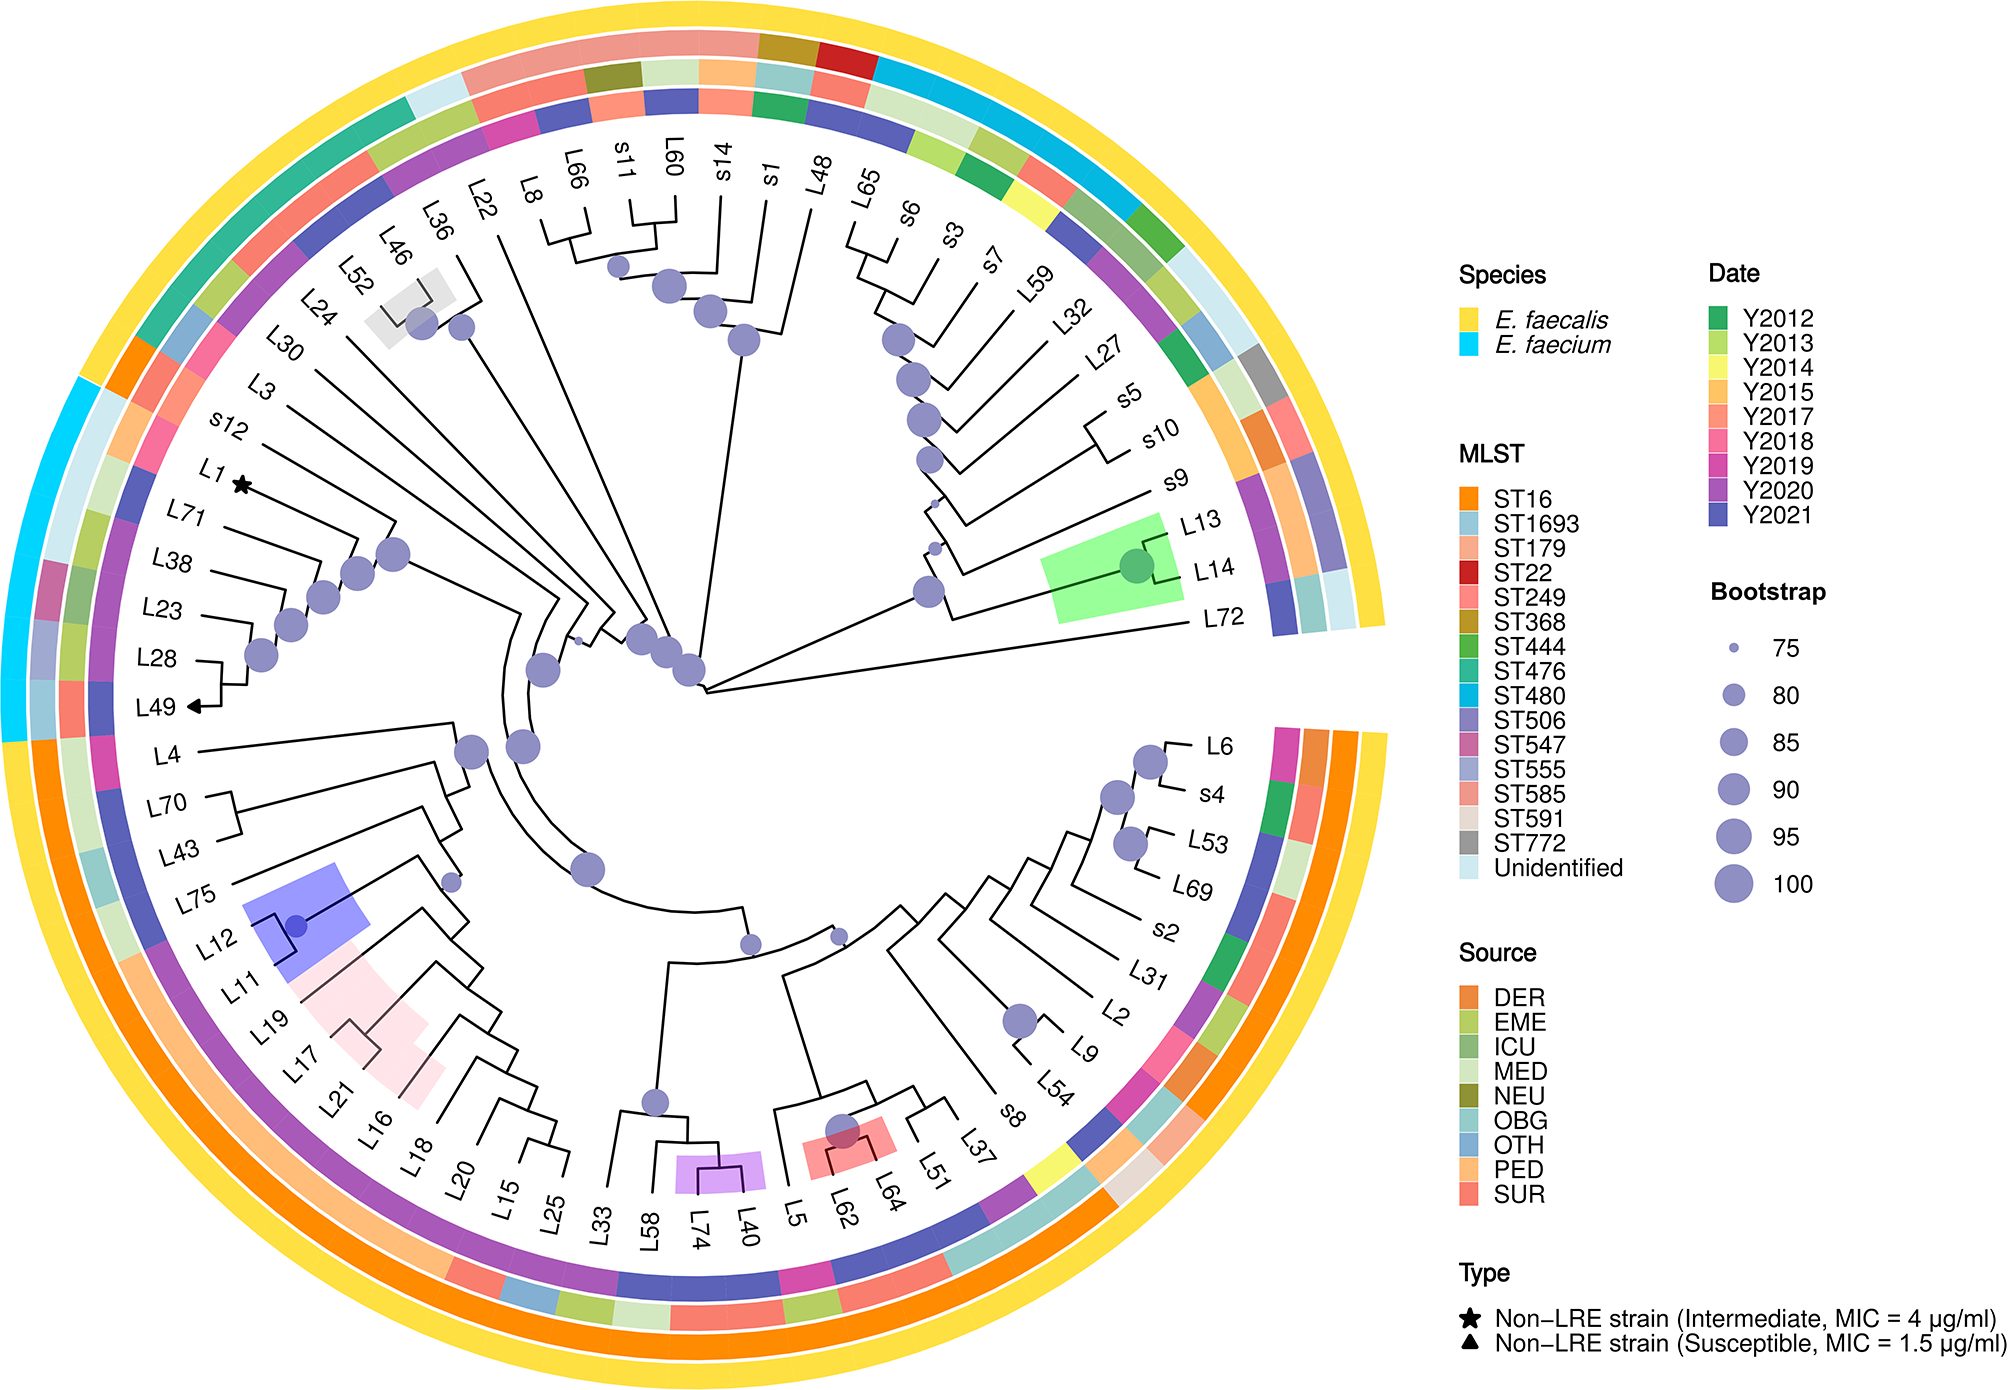 Genomic epidemiology reveals multiple mechanisms of linezolid resistance in clinical enterococci in China